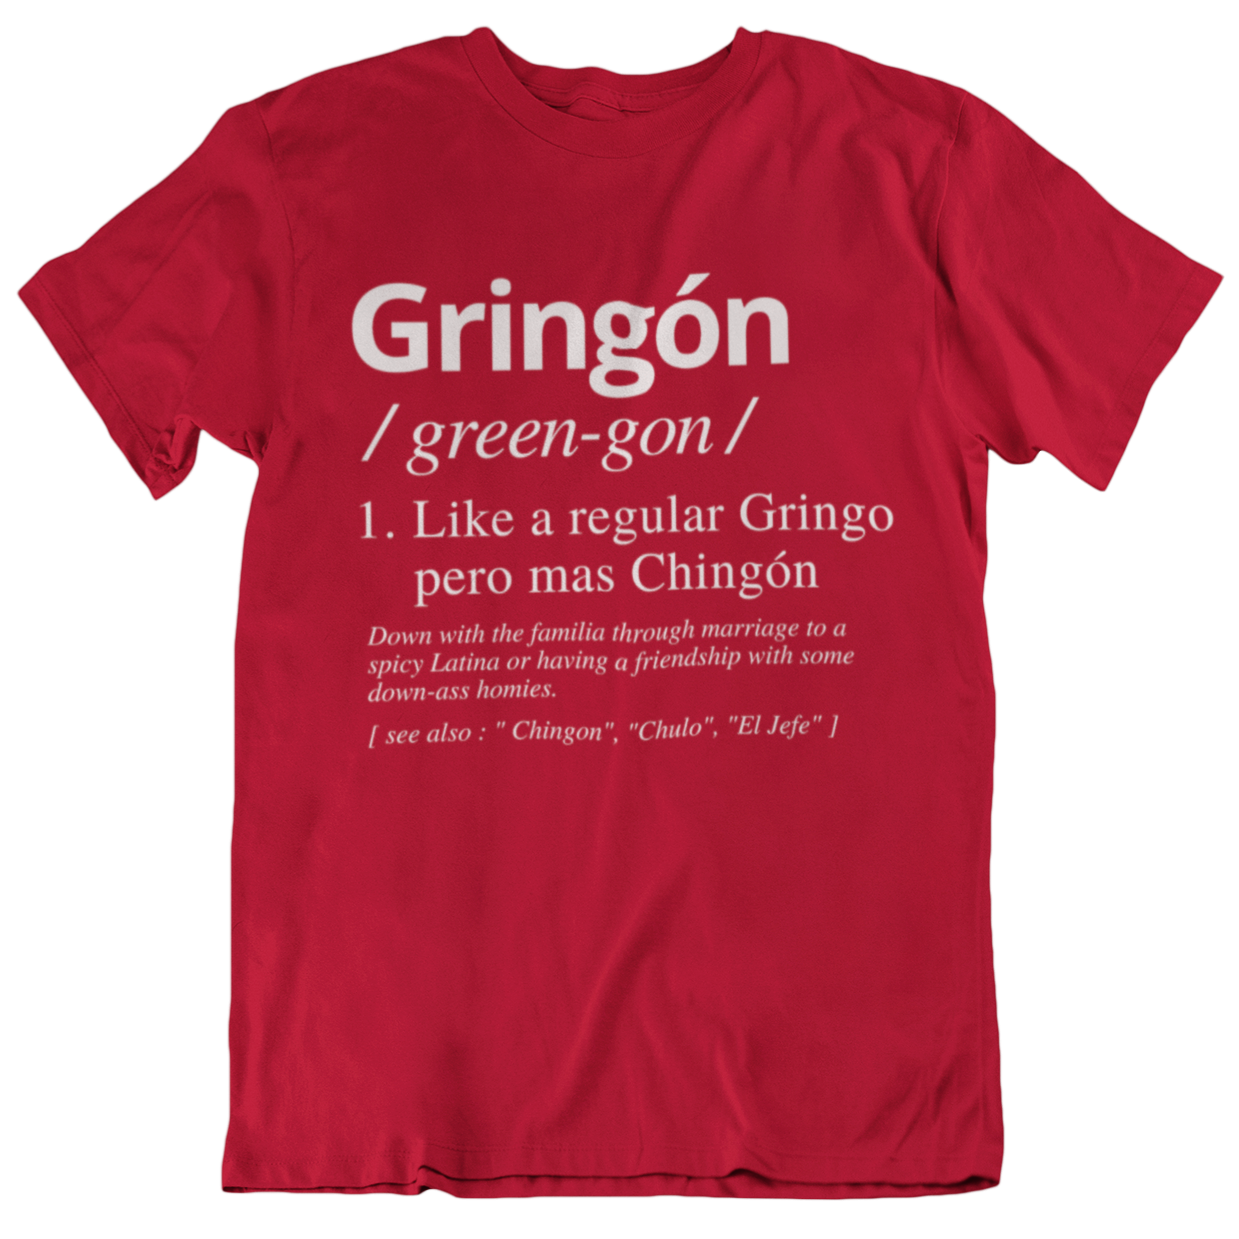 Funny t-shirt for men featuring a dictionary-style graphic and the word "Gringon" defined as "like a regular gringo, but cooler. Part of the family through marriage or friendship with Latinos